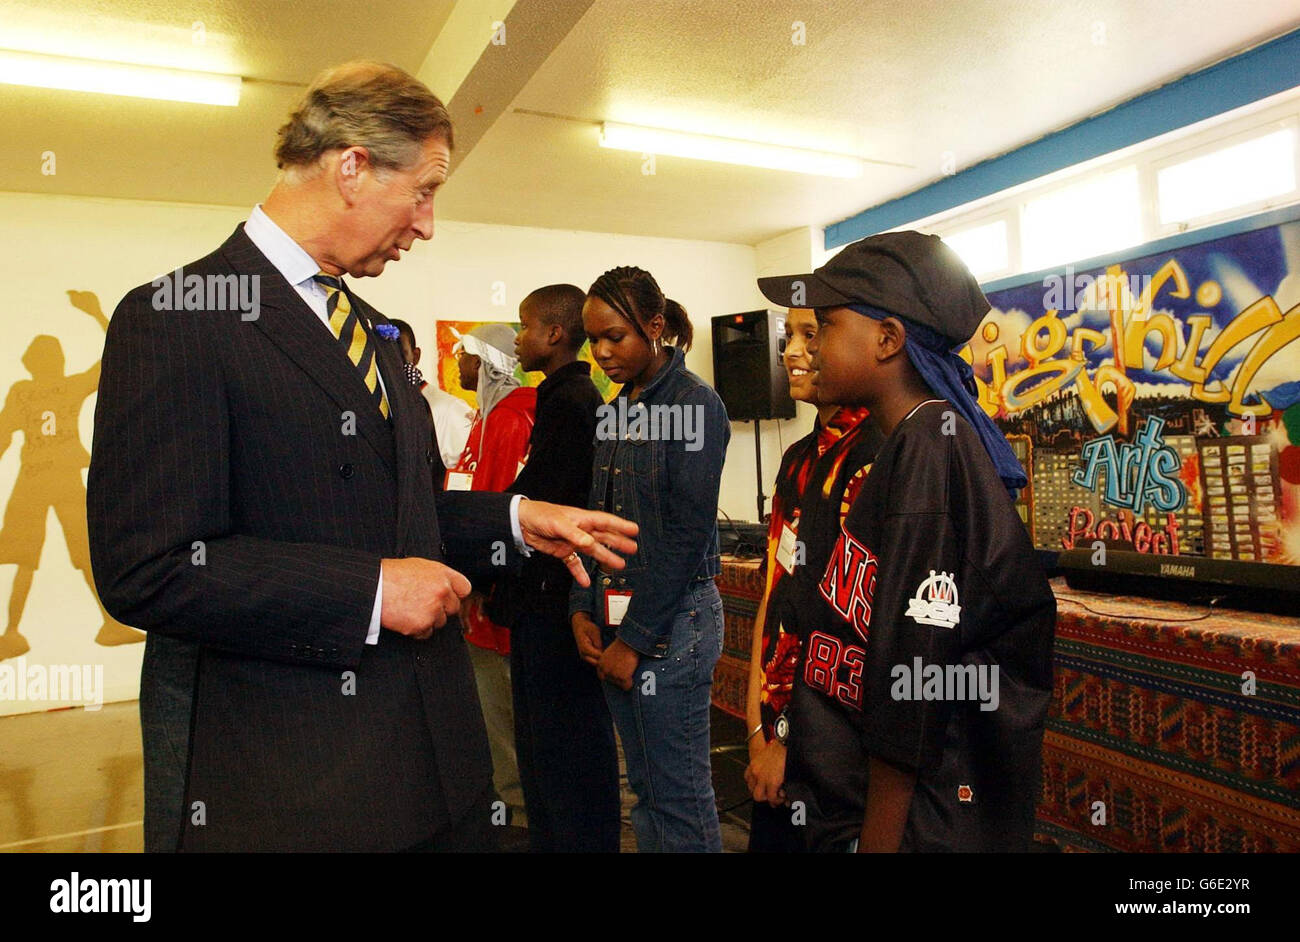 The Prince of Wales talks to local people at the Sighthill Youth Centre in Glasgow, during a tour of Scotland. * During the visit to the housing estate - one of the most deprived in the country - the Prince was shown what efforts have been made to overcome the area's bad image. The Prince visited the scheme with Prince William in 2001, when the area was in the midst of racial tension following the murder of asylum seeker Firsat Dag. Stock Photo